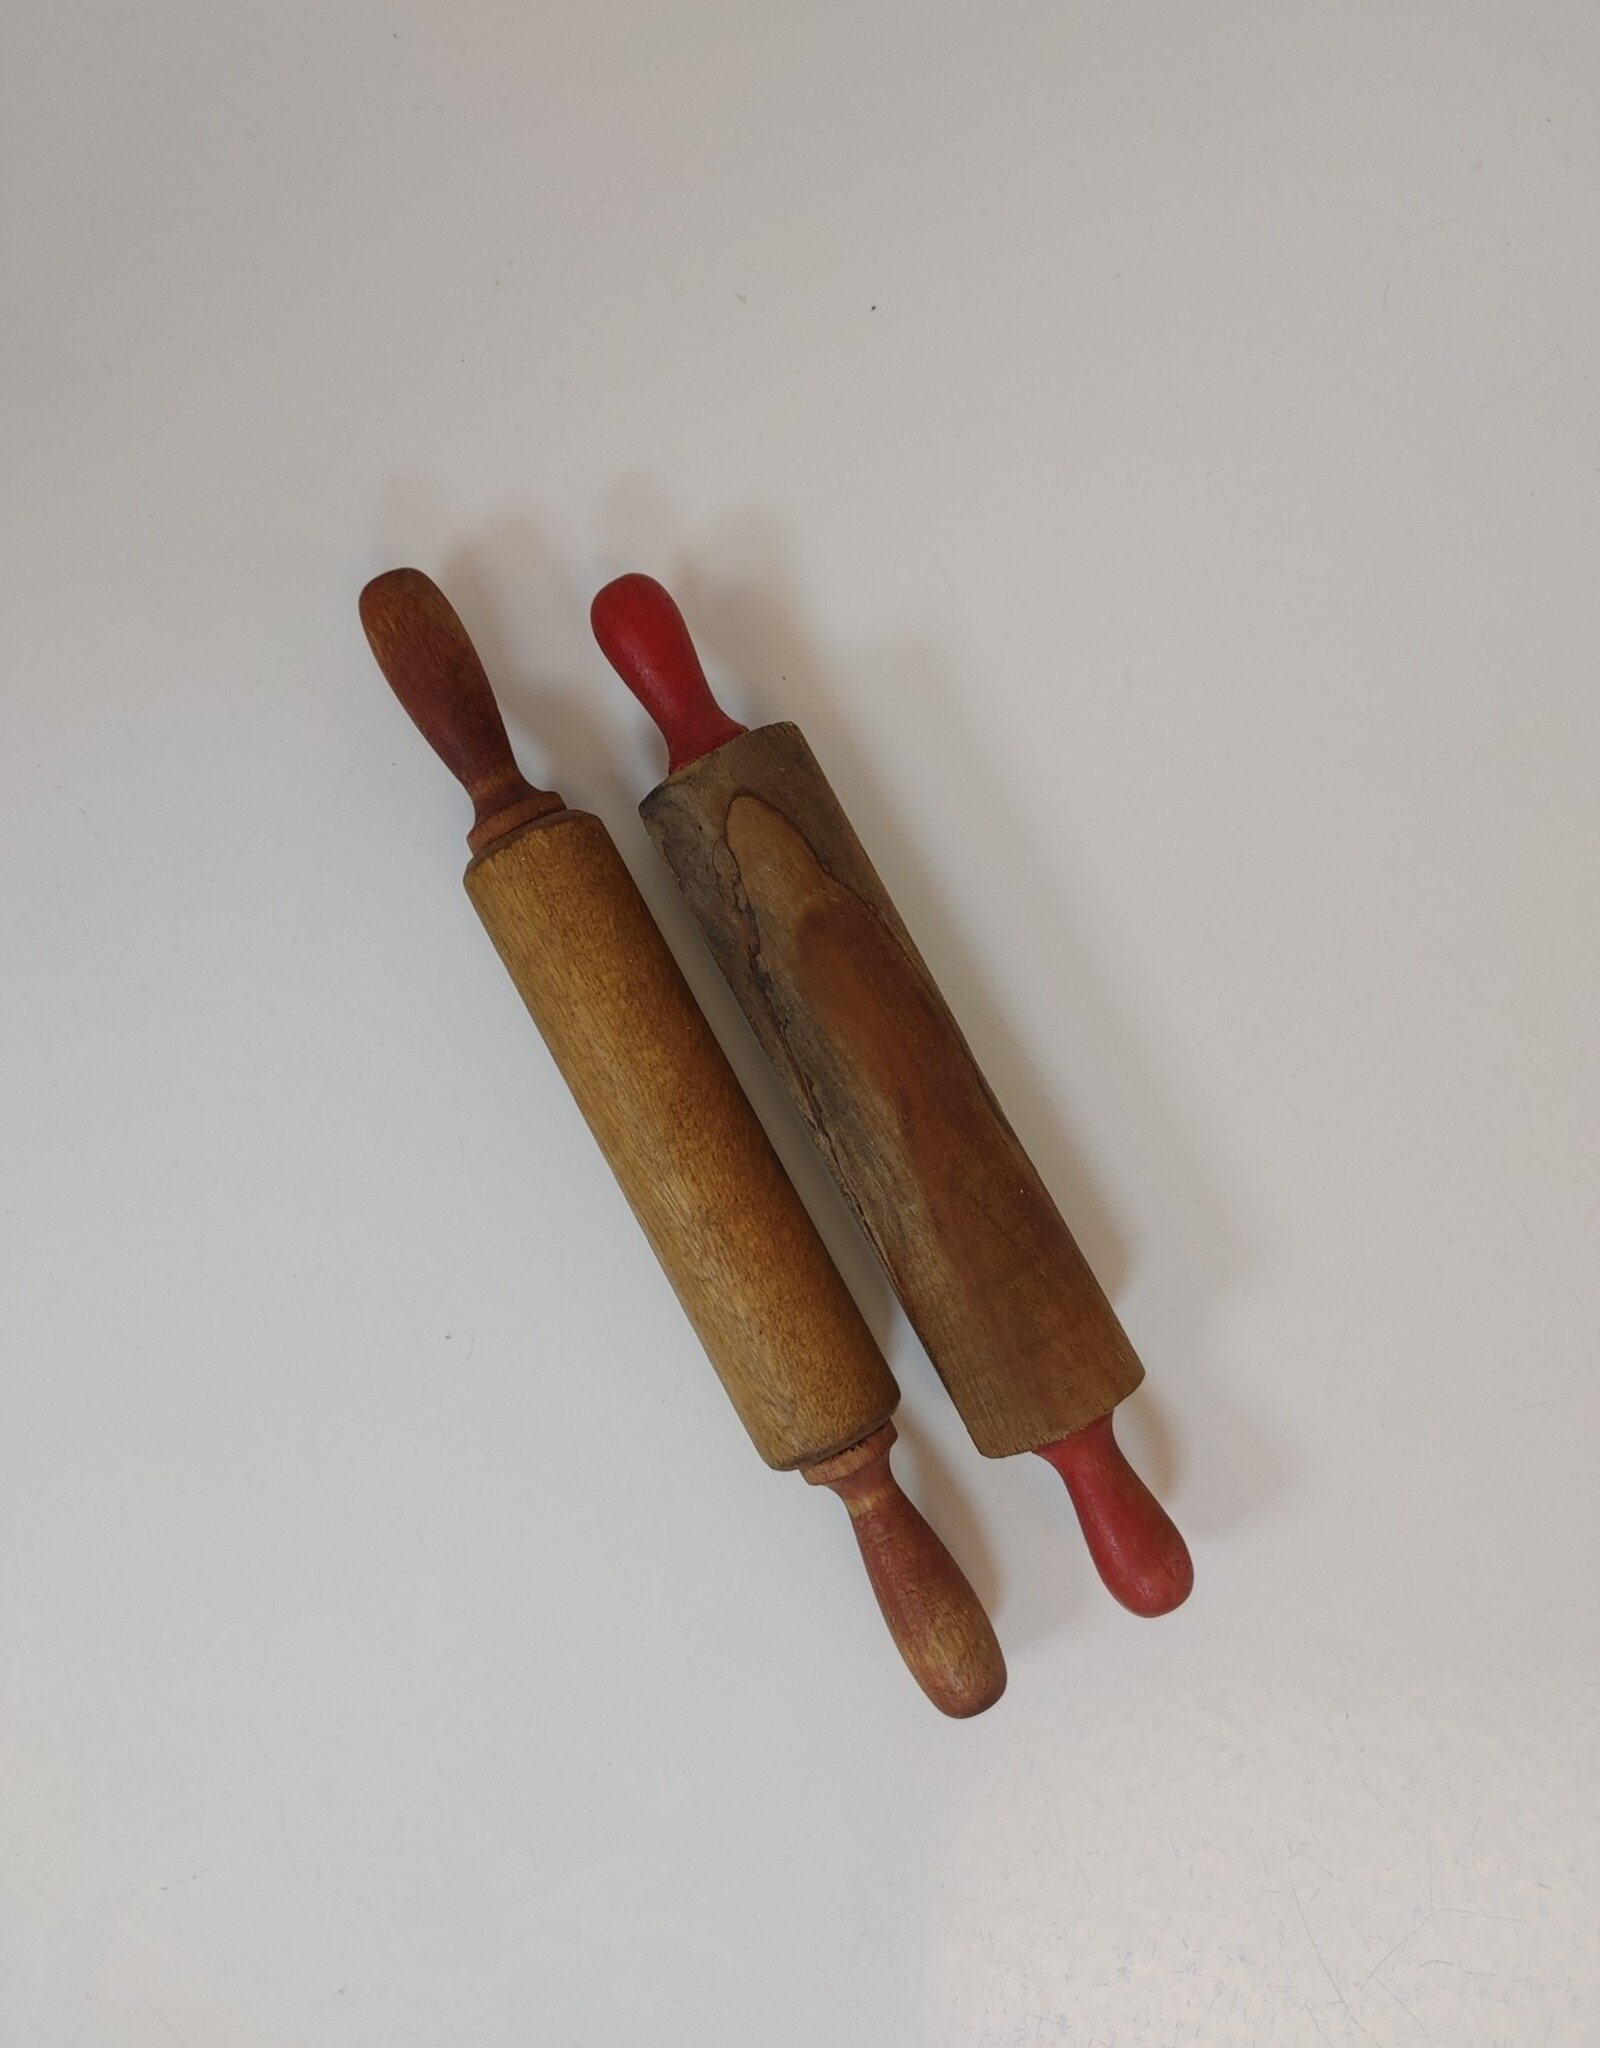 Vintage Child's Wooden Rolling Pin